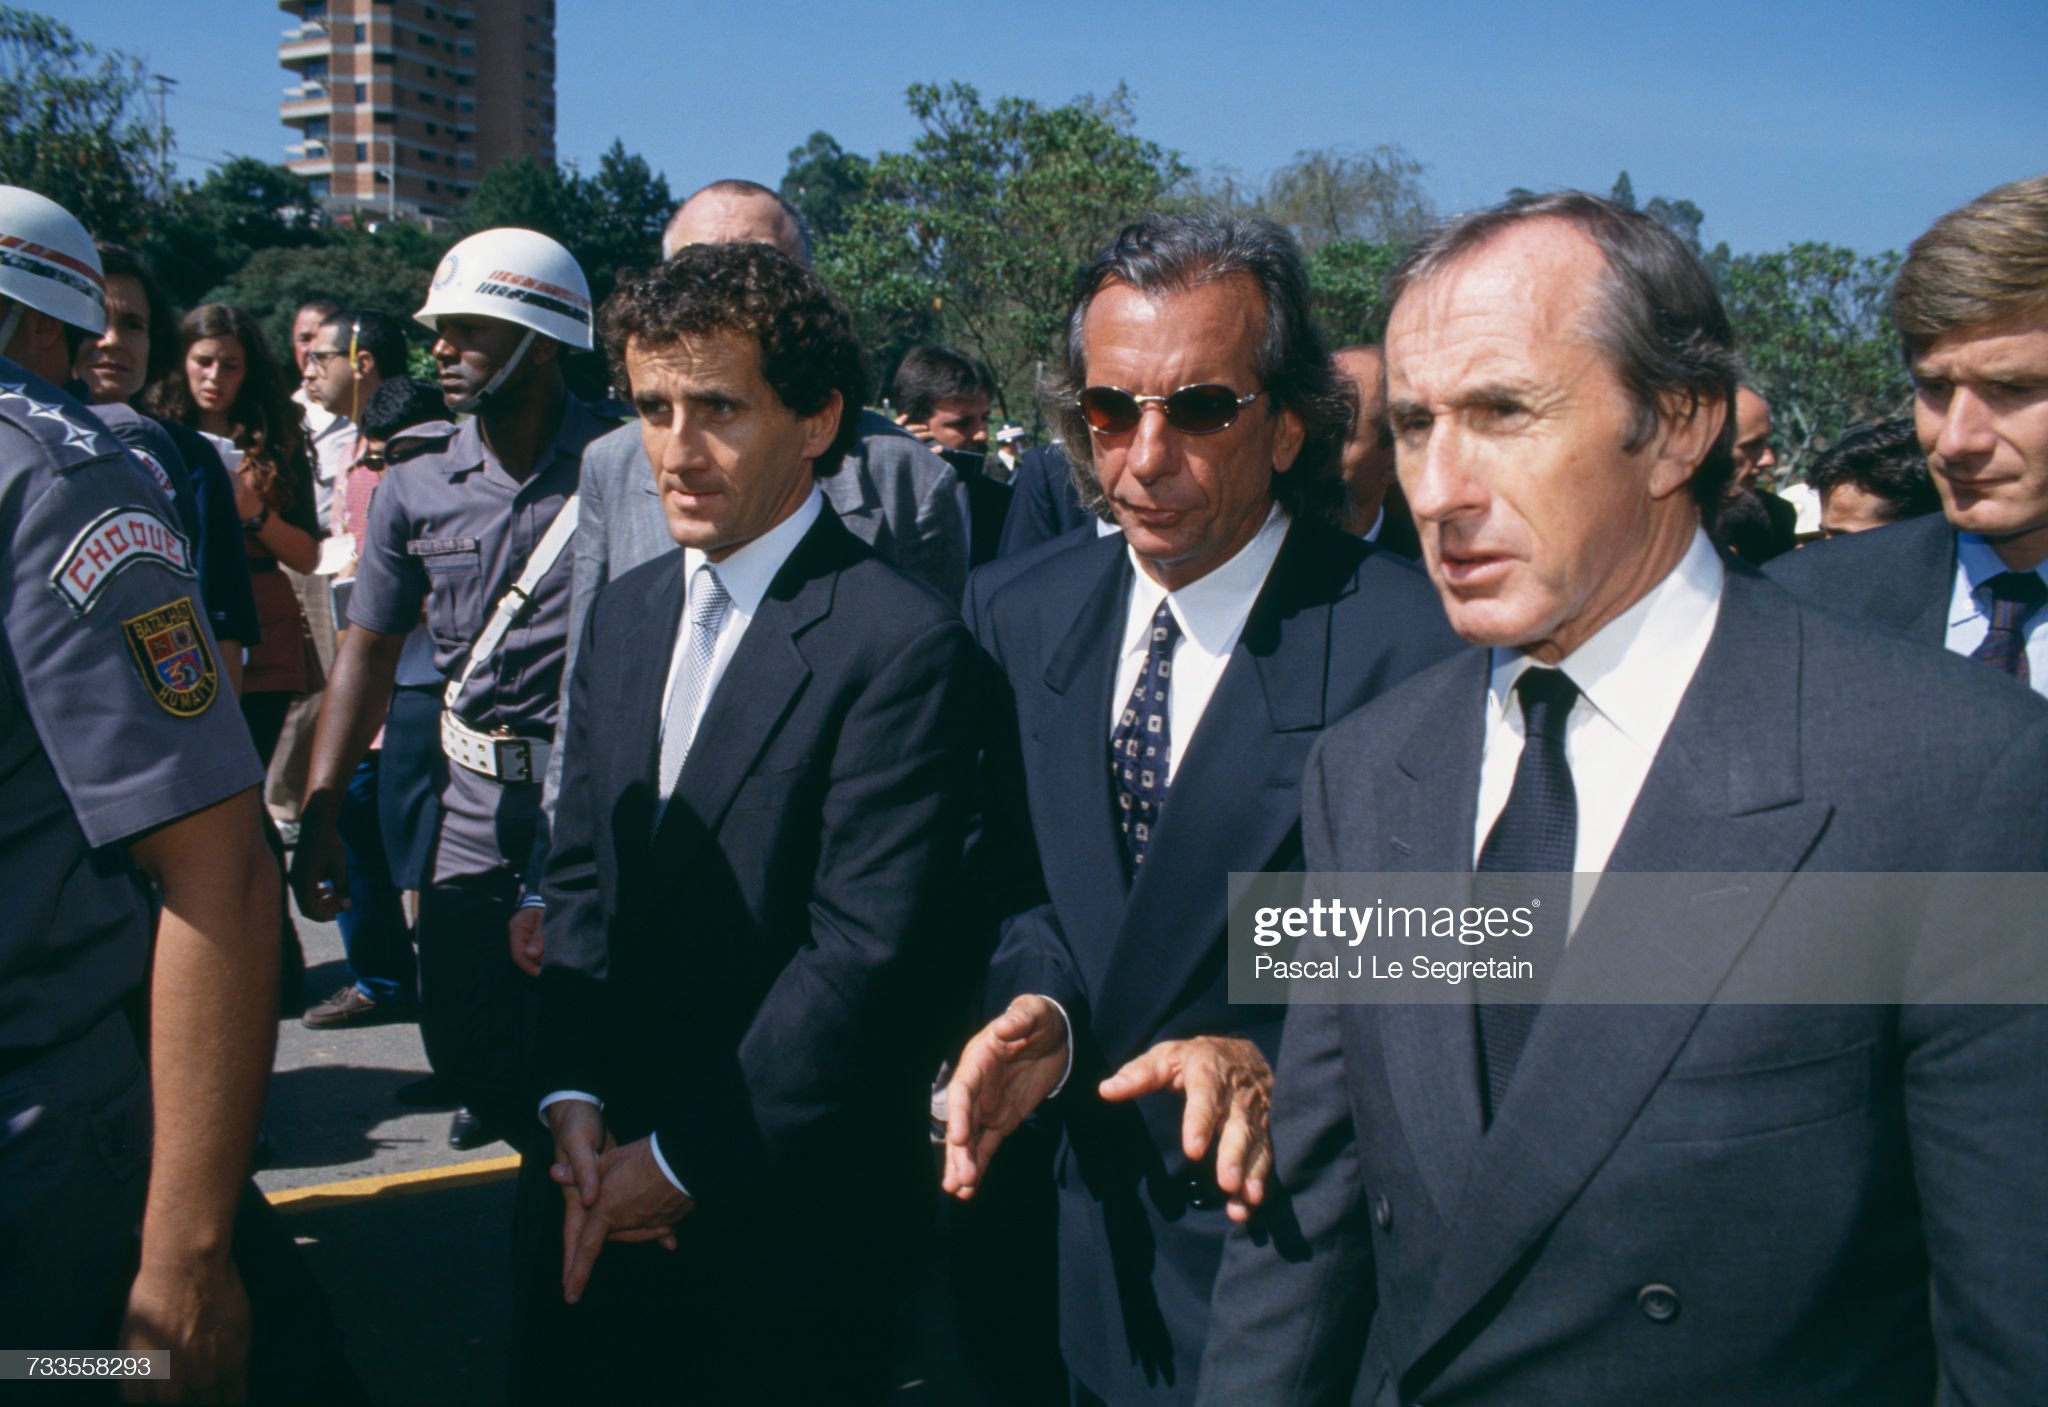 Alain Prost, Emerson Fittipaldi and Jackie Stewart at the funeral of Ayrton Senna. 